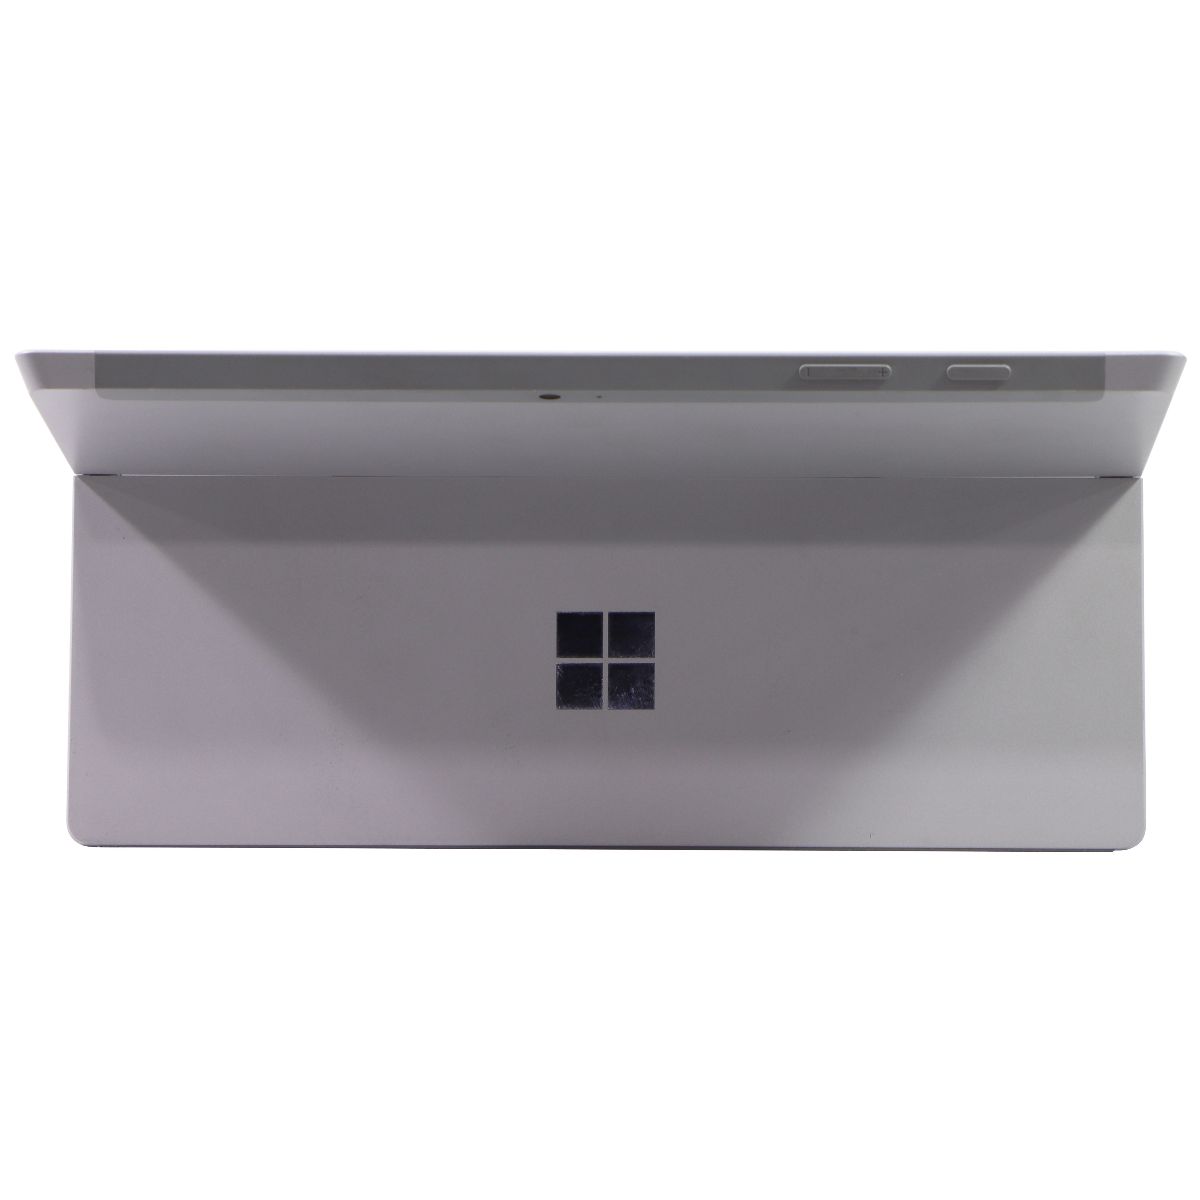 Microsoft Surface 3 (10.8-inch) Tablet 1657 LTE (Verizon) - 128GB / Silver iPads, Tablets & eBook Readers Microsoft    - Simple Cell Bulk Wholesale Pricing - USA Seller